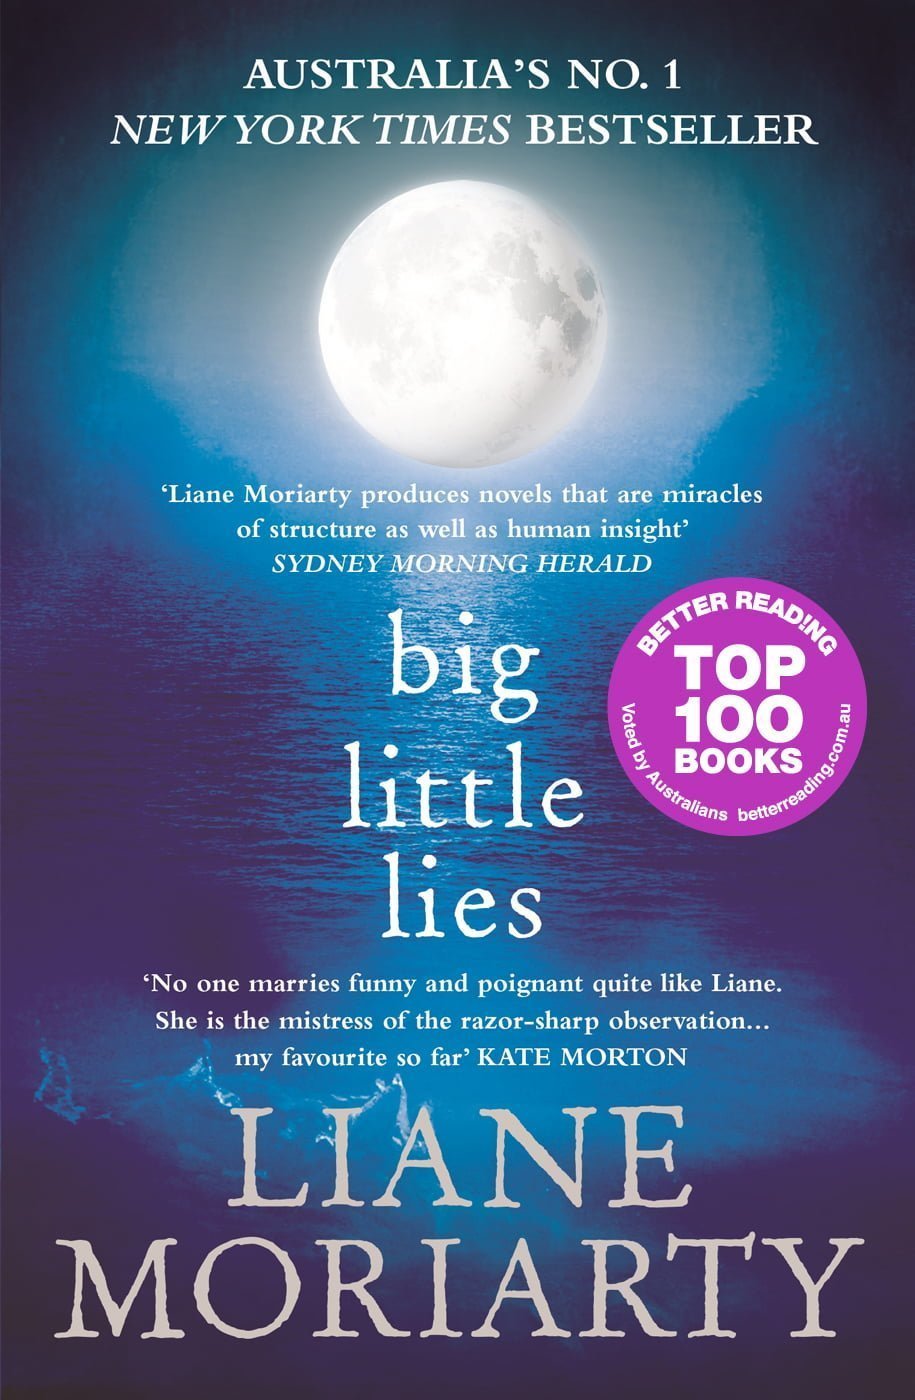 The First Better Reading Book Club Live: Big Little Lies by Liane Moriarty